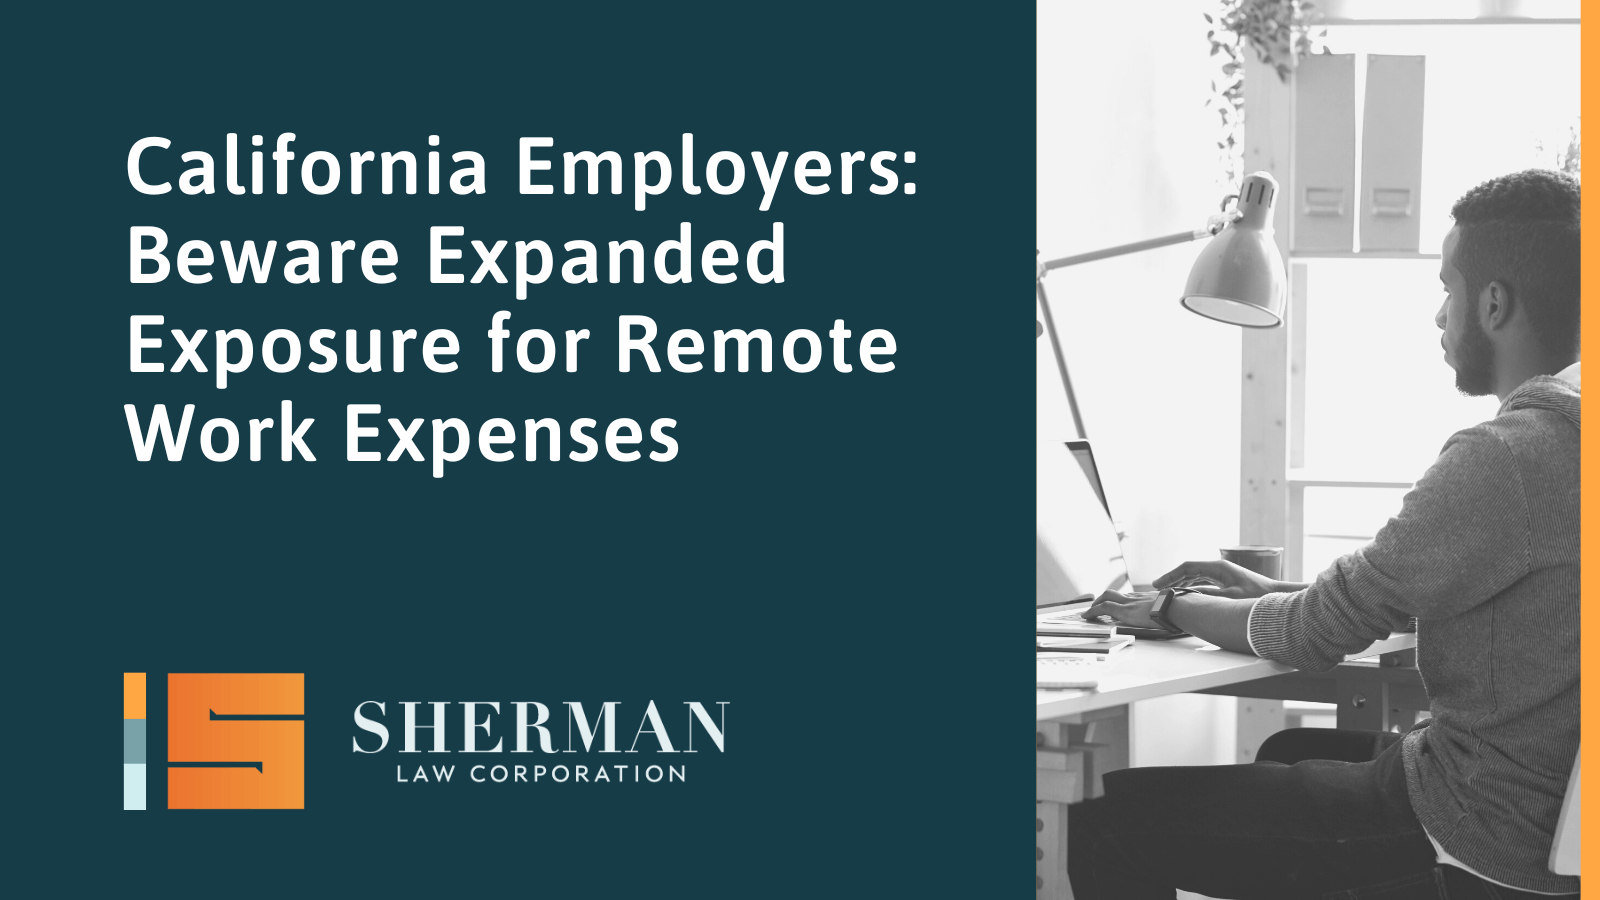 California Employers: Beware Expanded Exposure for Remote Work Expenses